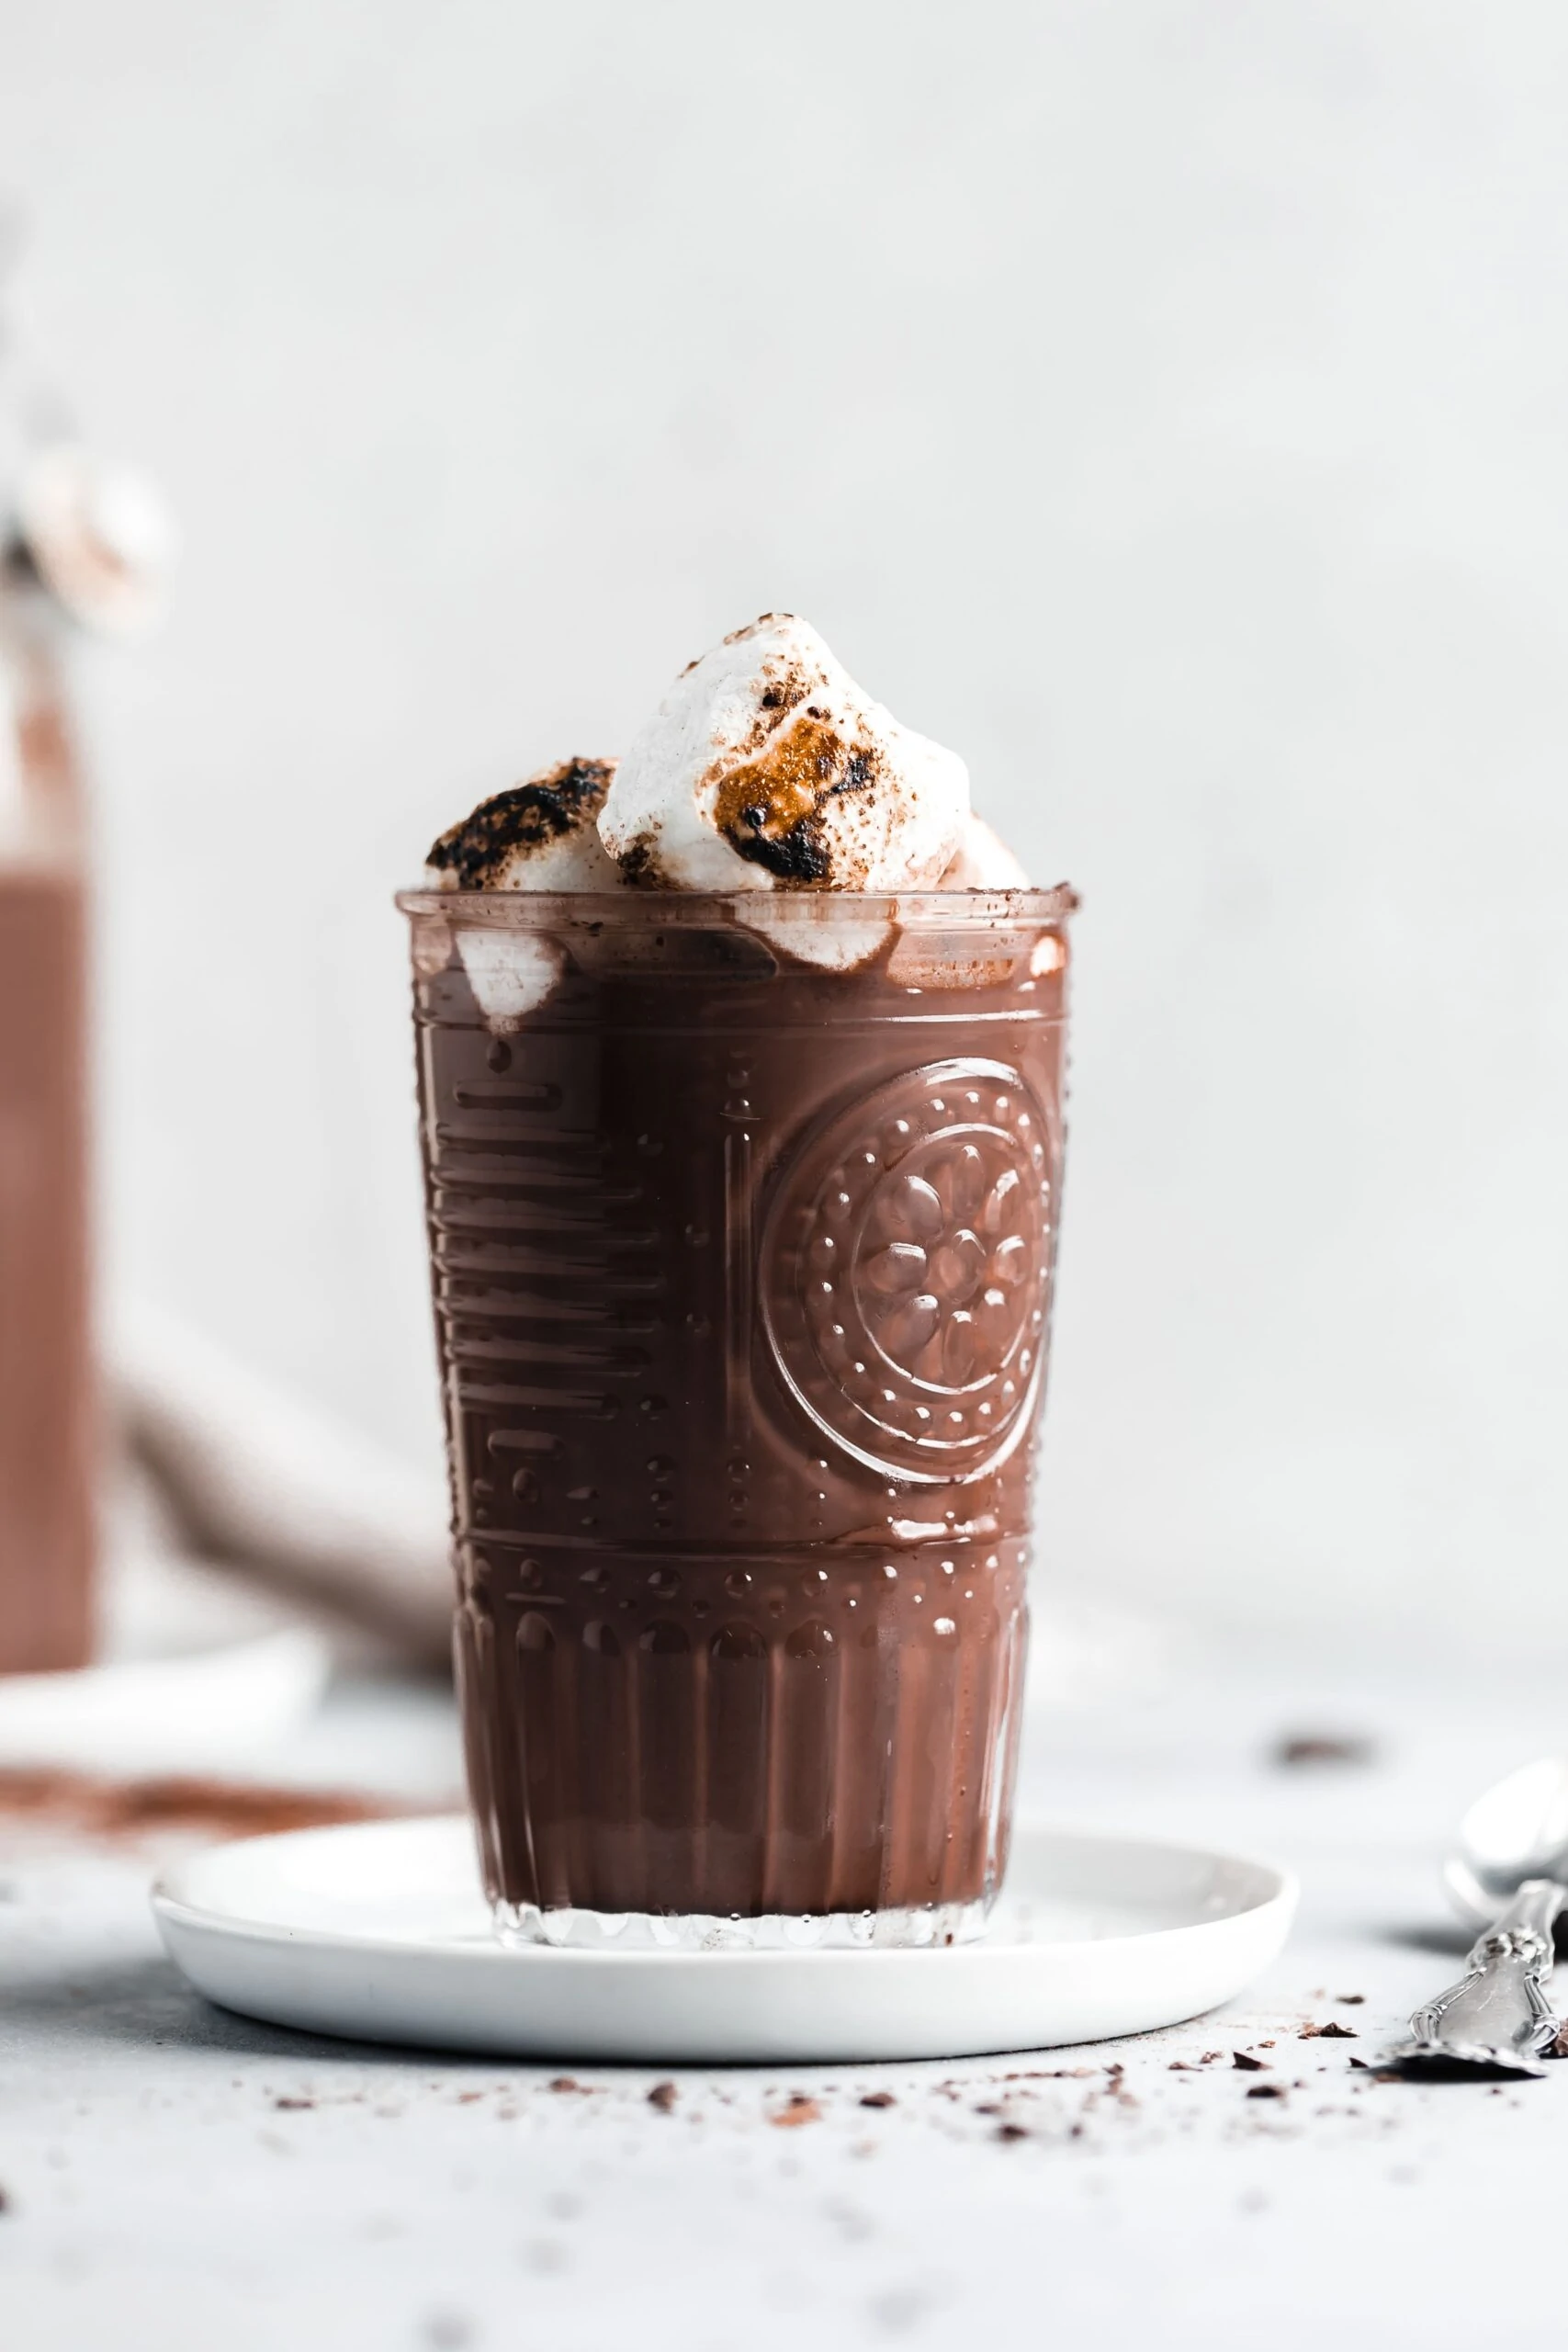 Show yourself a little self care with this perfectly chocolatey hot chocolate for one! Top with some torched marshmallows for some added indulgence. 